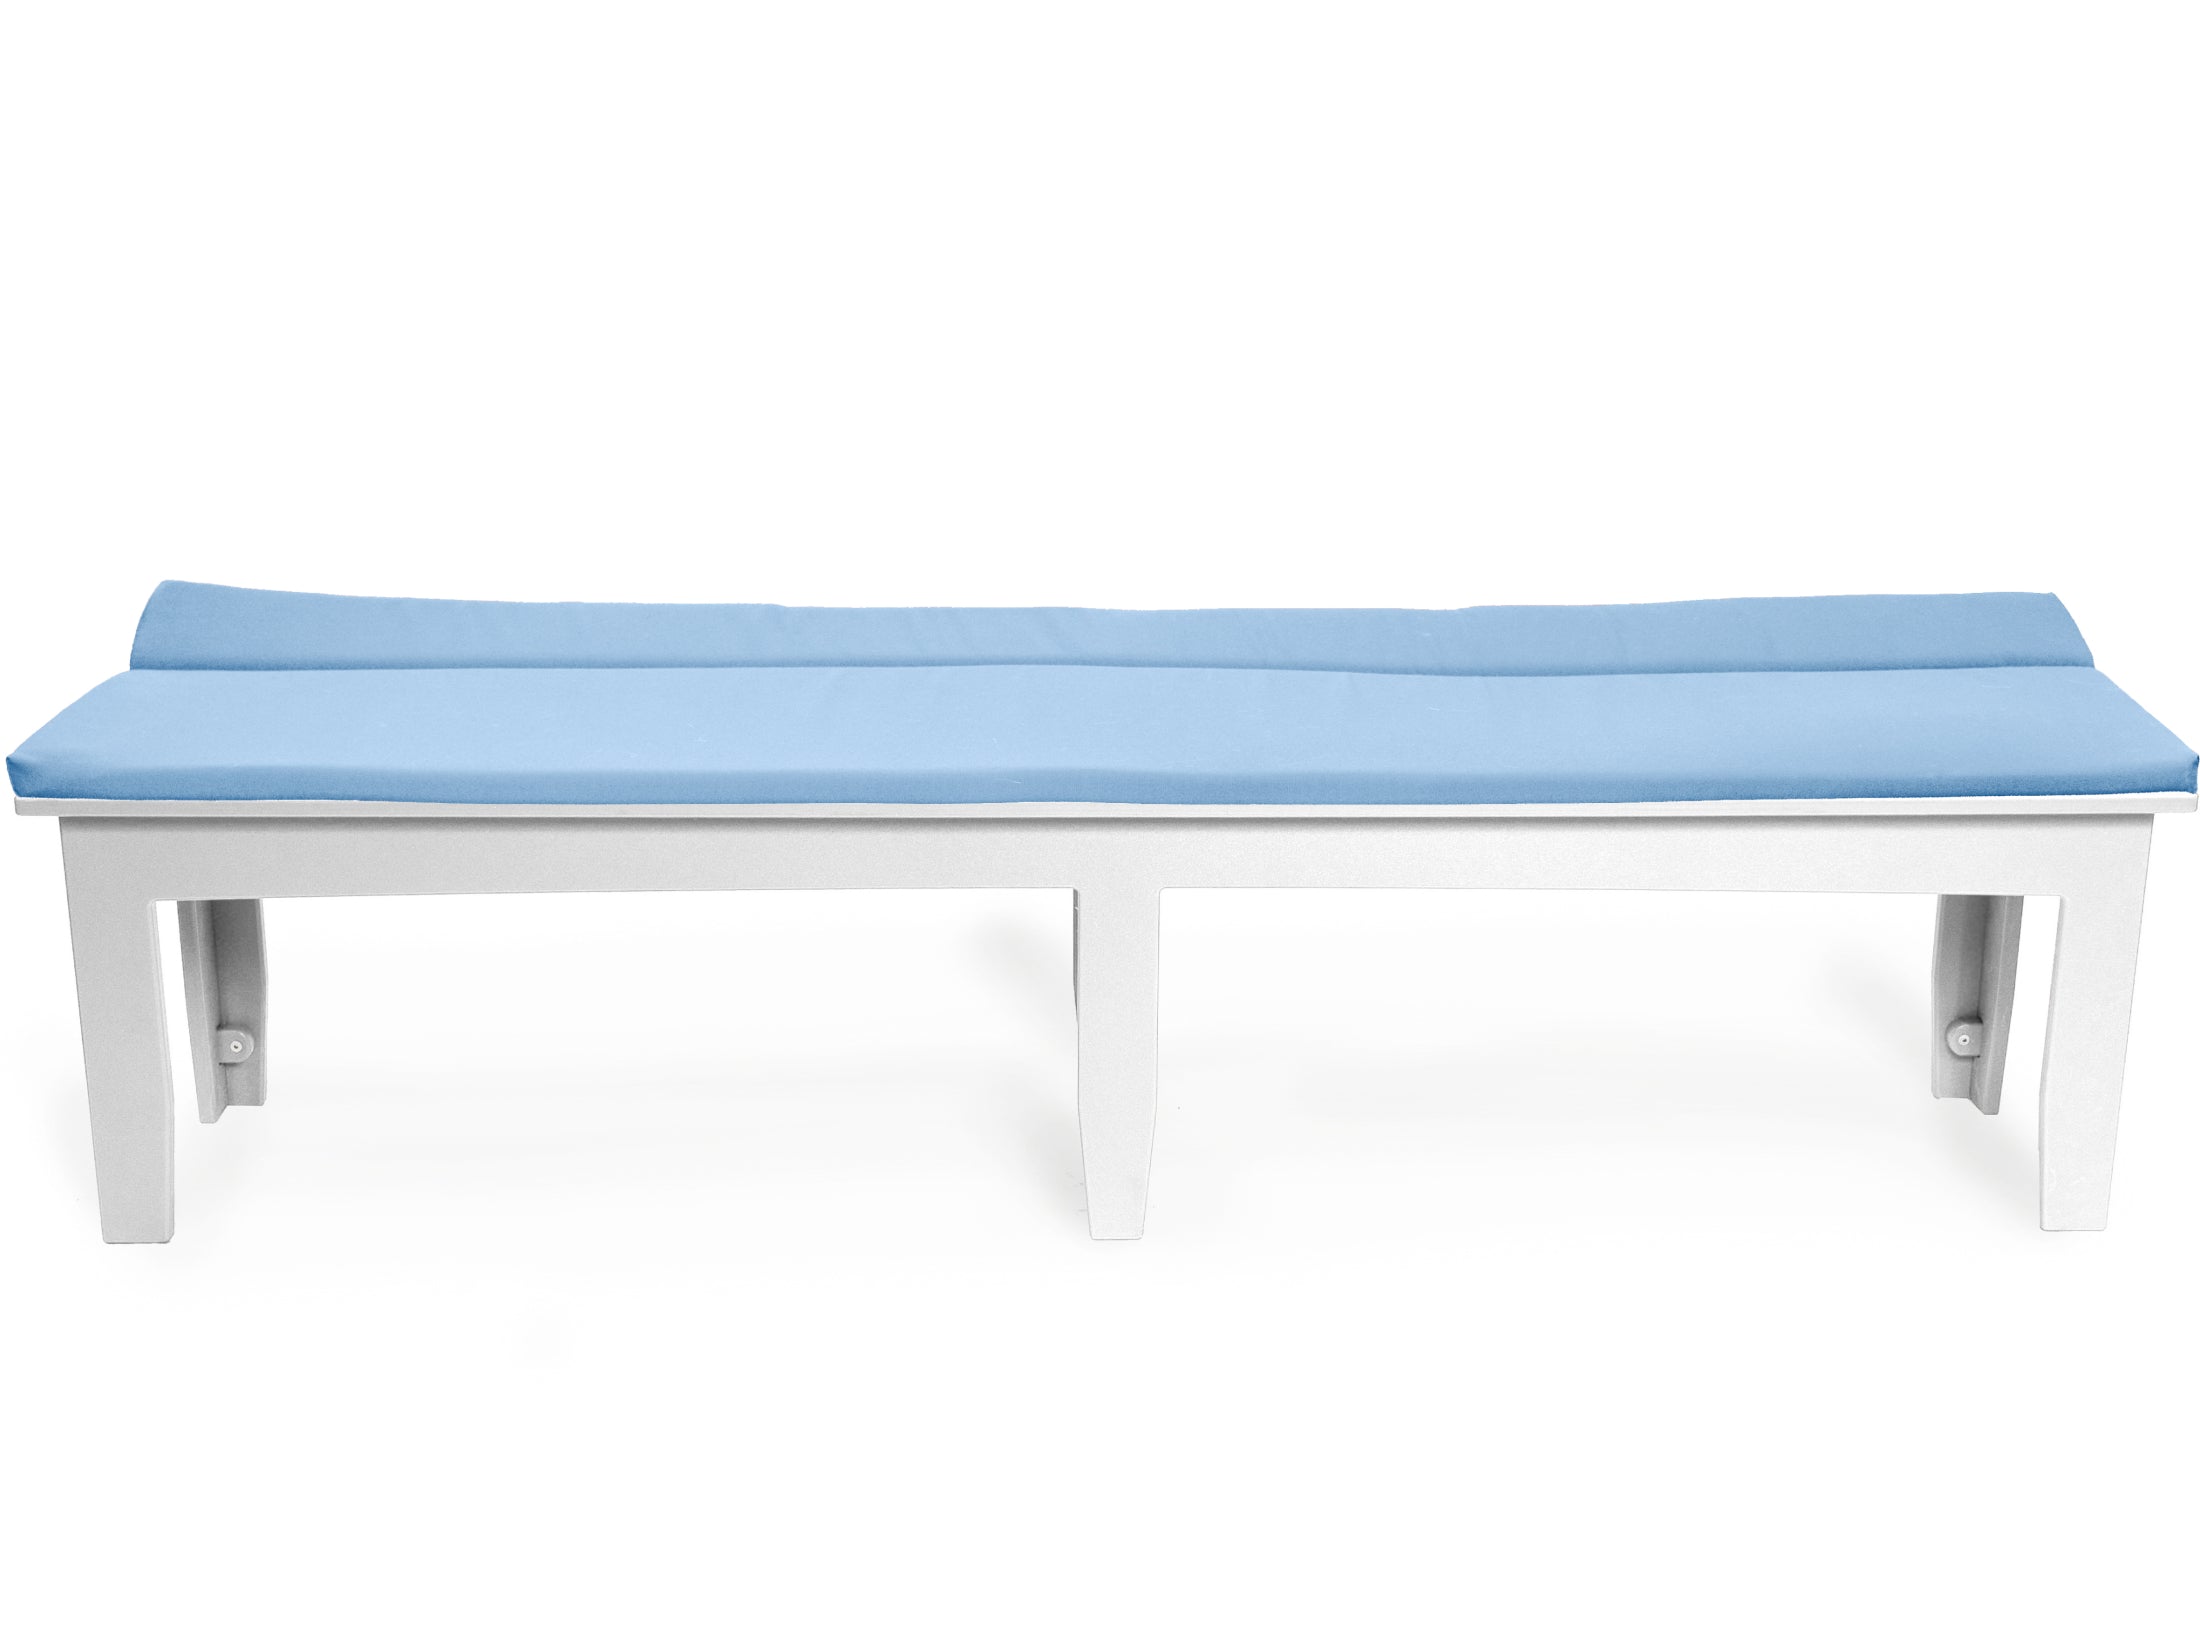 Dining Bench Cushion, 6 Ft